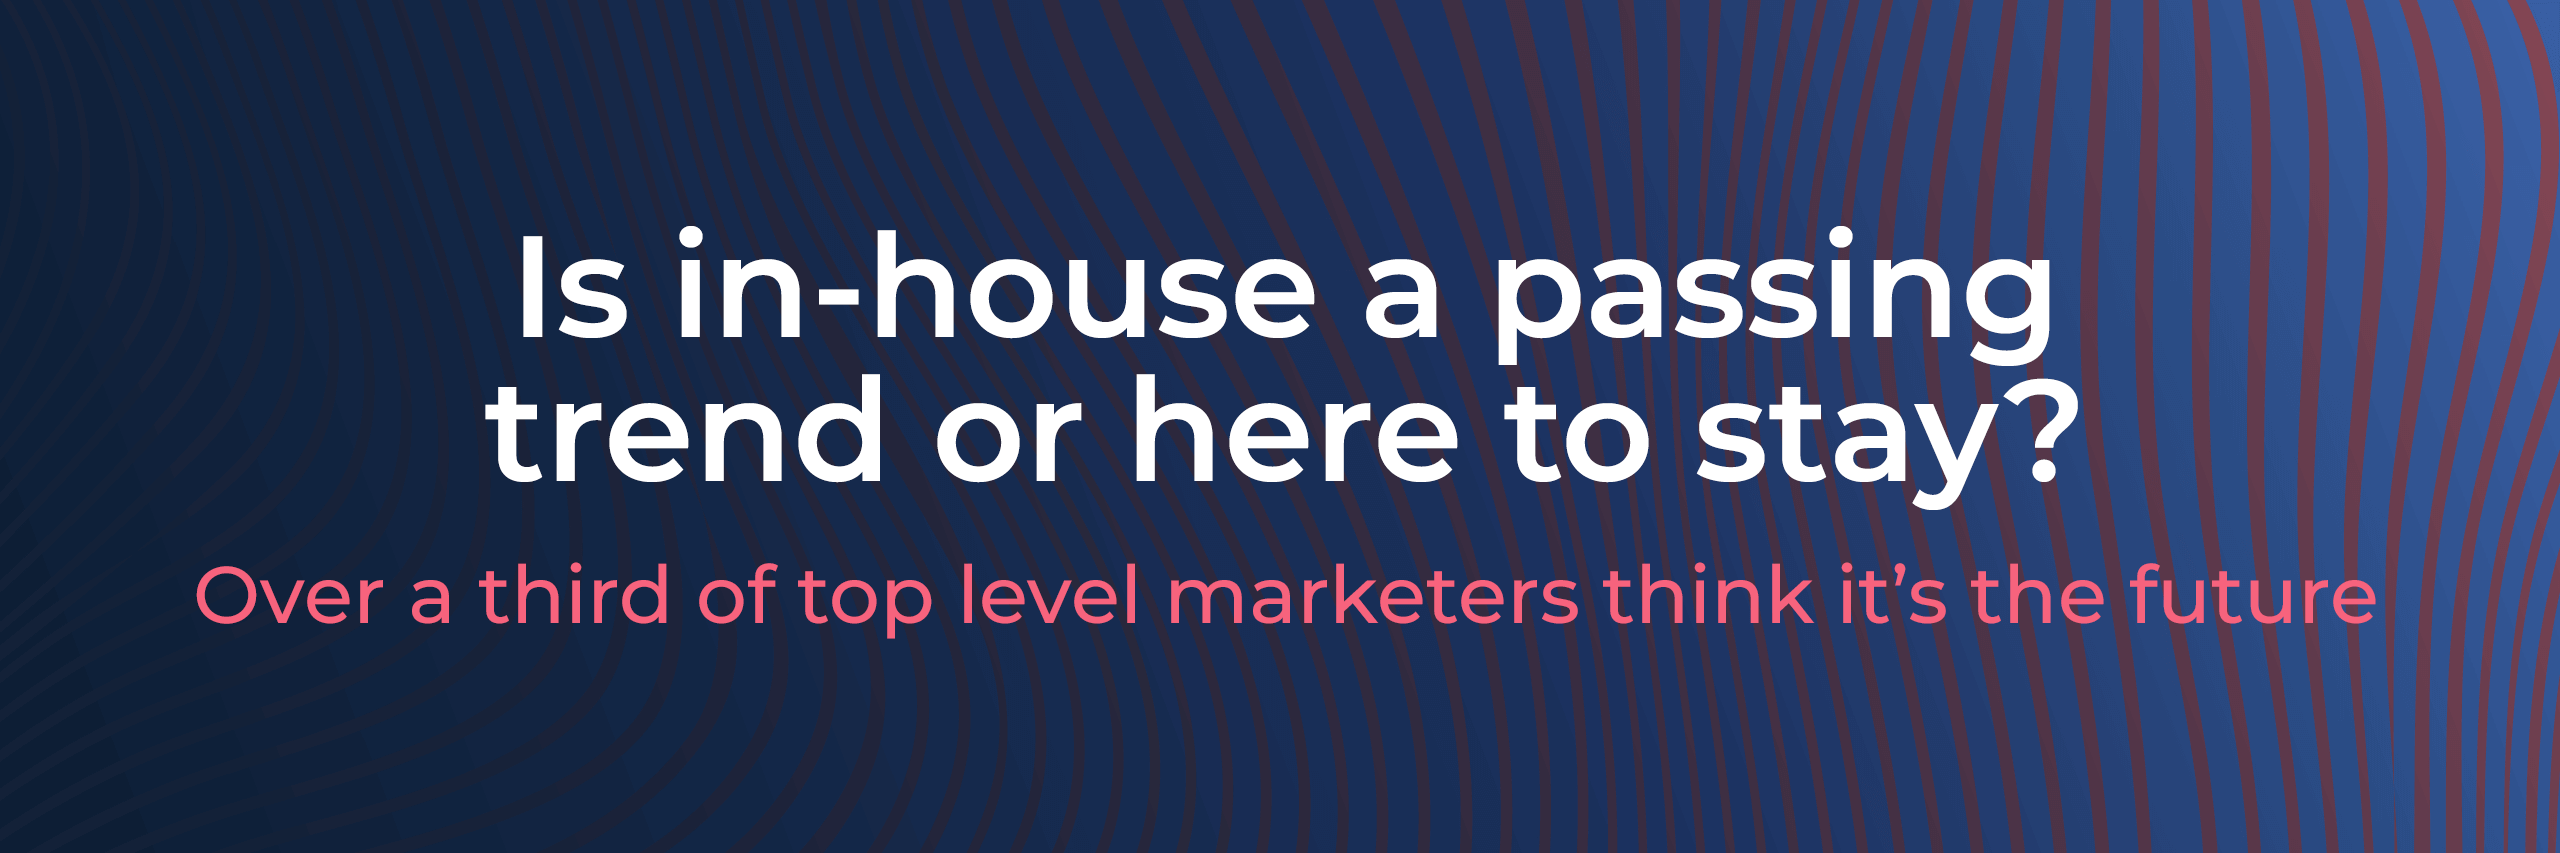 Is in-house marketing a passing trend or here to stay?